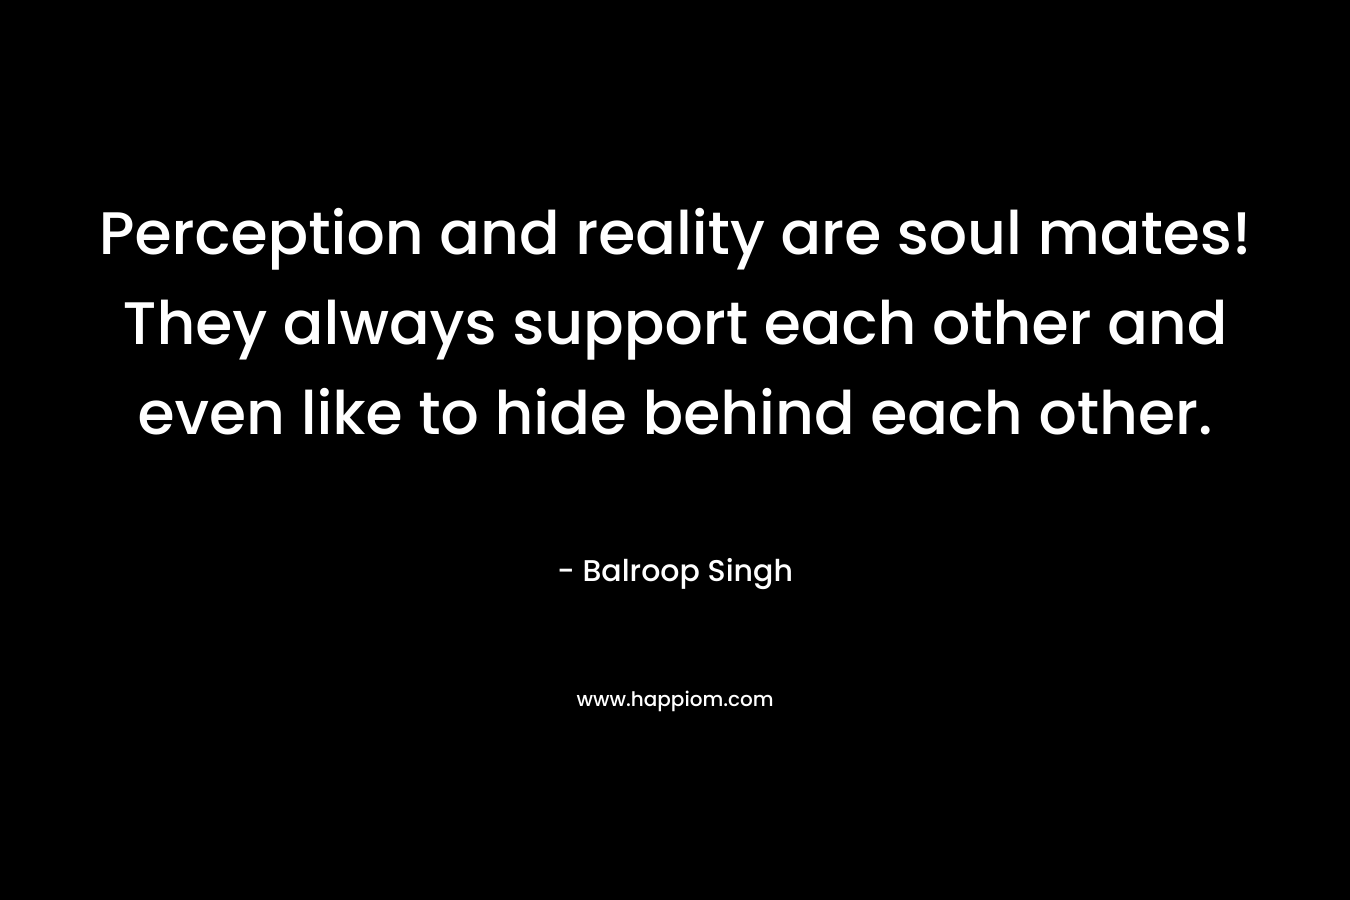 Perception and reality are soul mates! They always support each other and even like to hide behind each other. – Balroop Singh